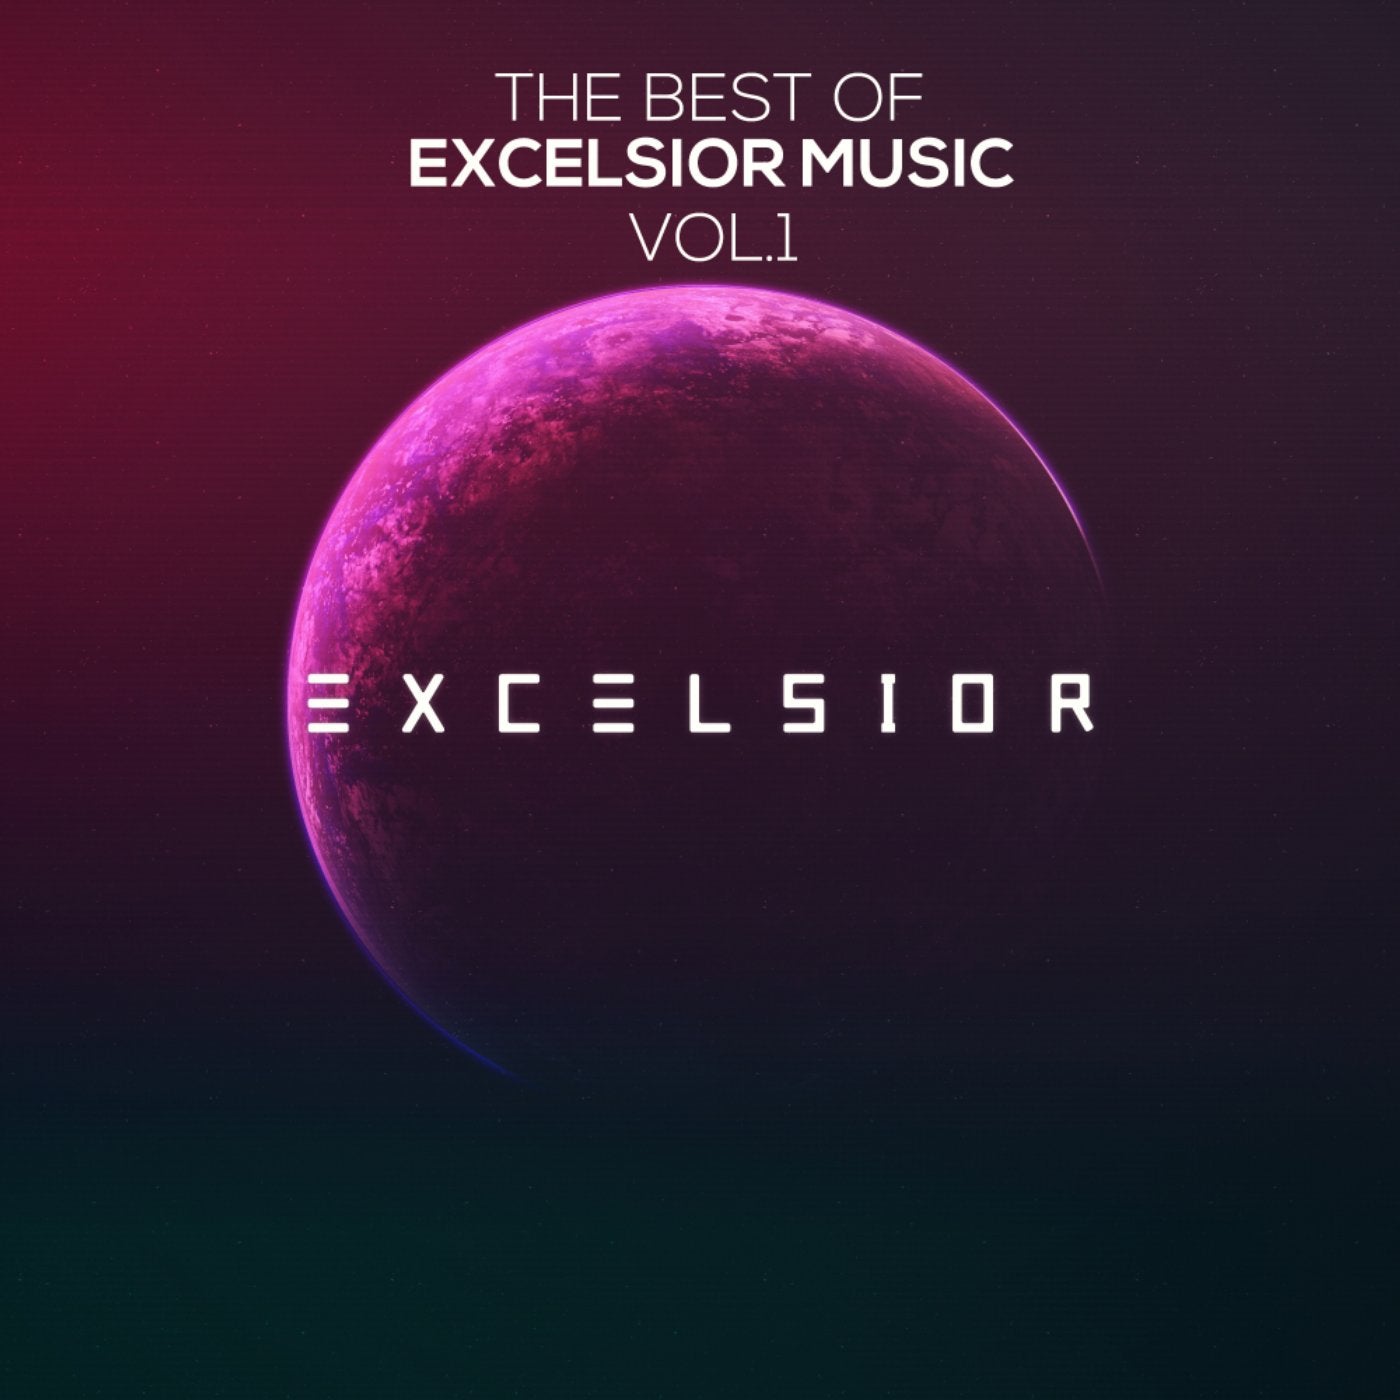 The Best of Excelsior Music, Vol. 1